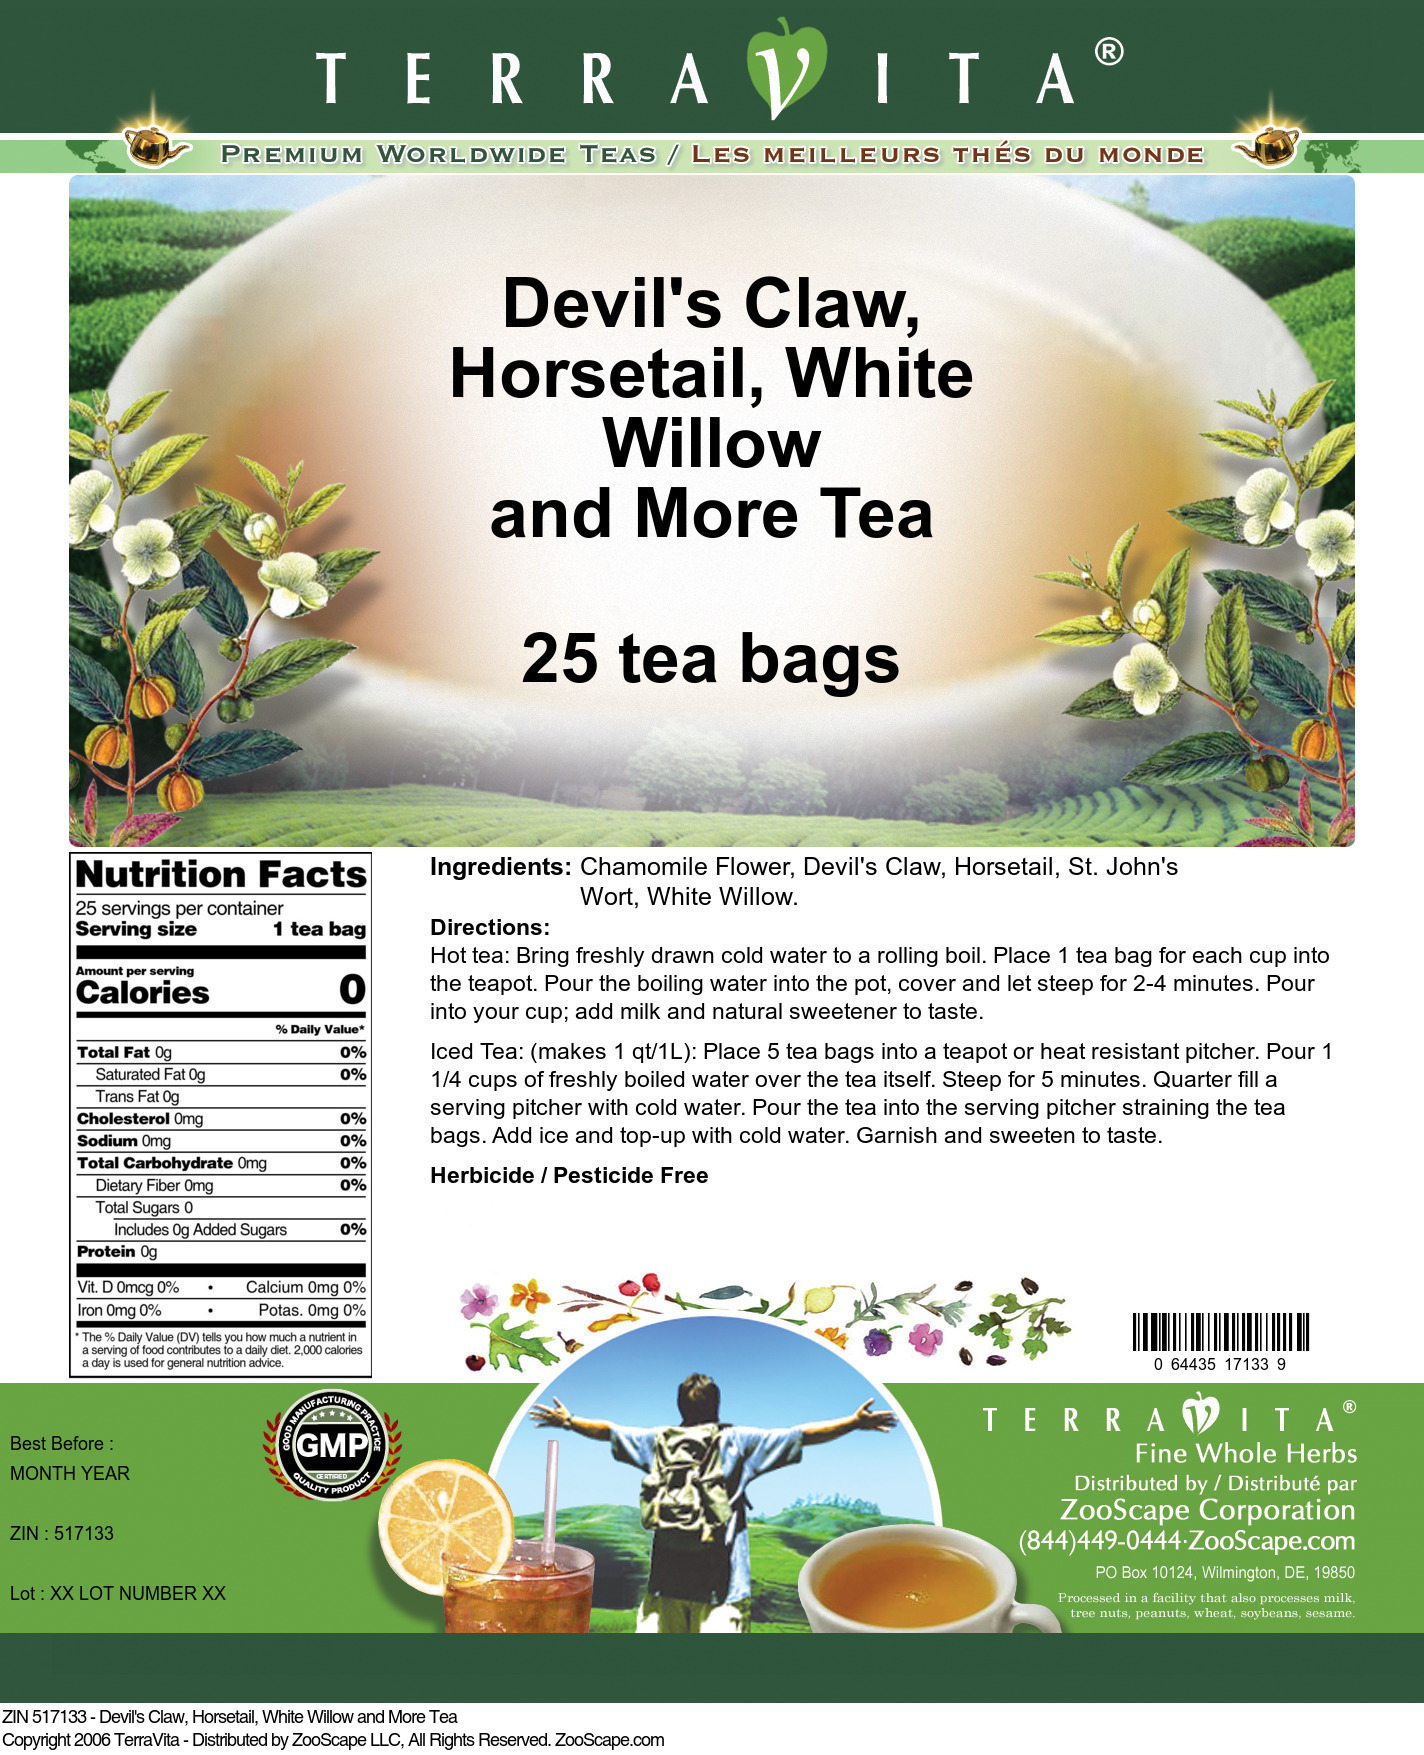 Devil's Claw, Horsetail, White Willow and More Tea - Label